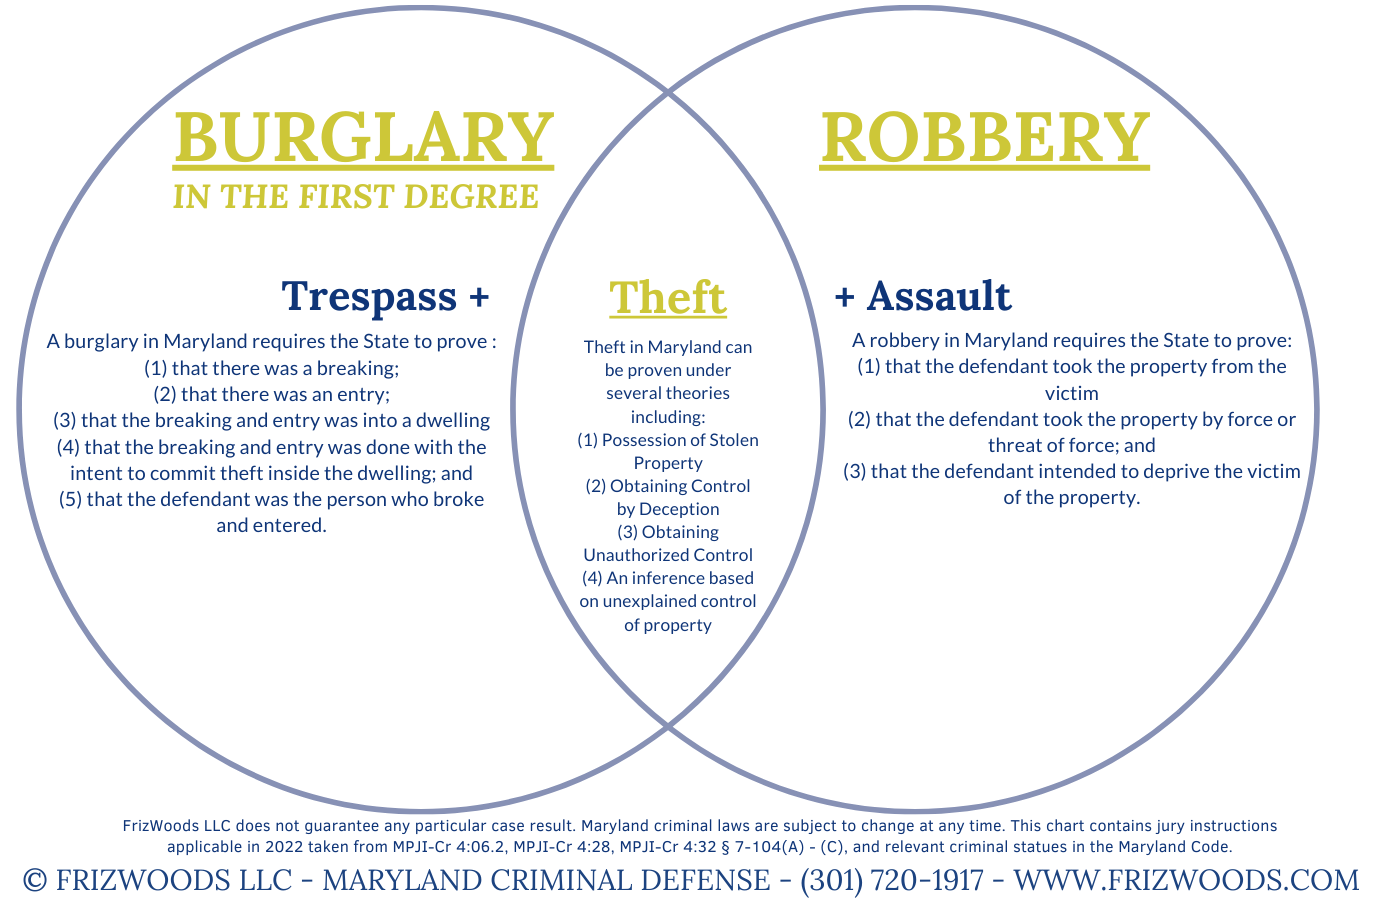 Definition & Meaning of Robbery